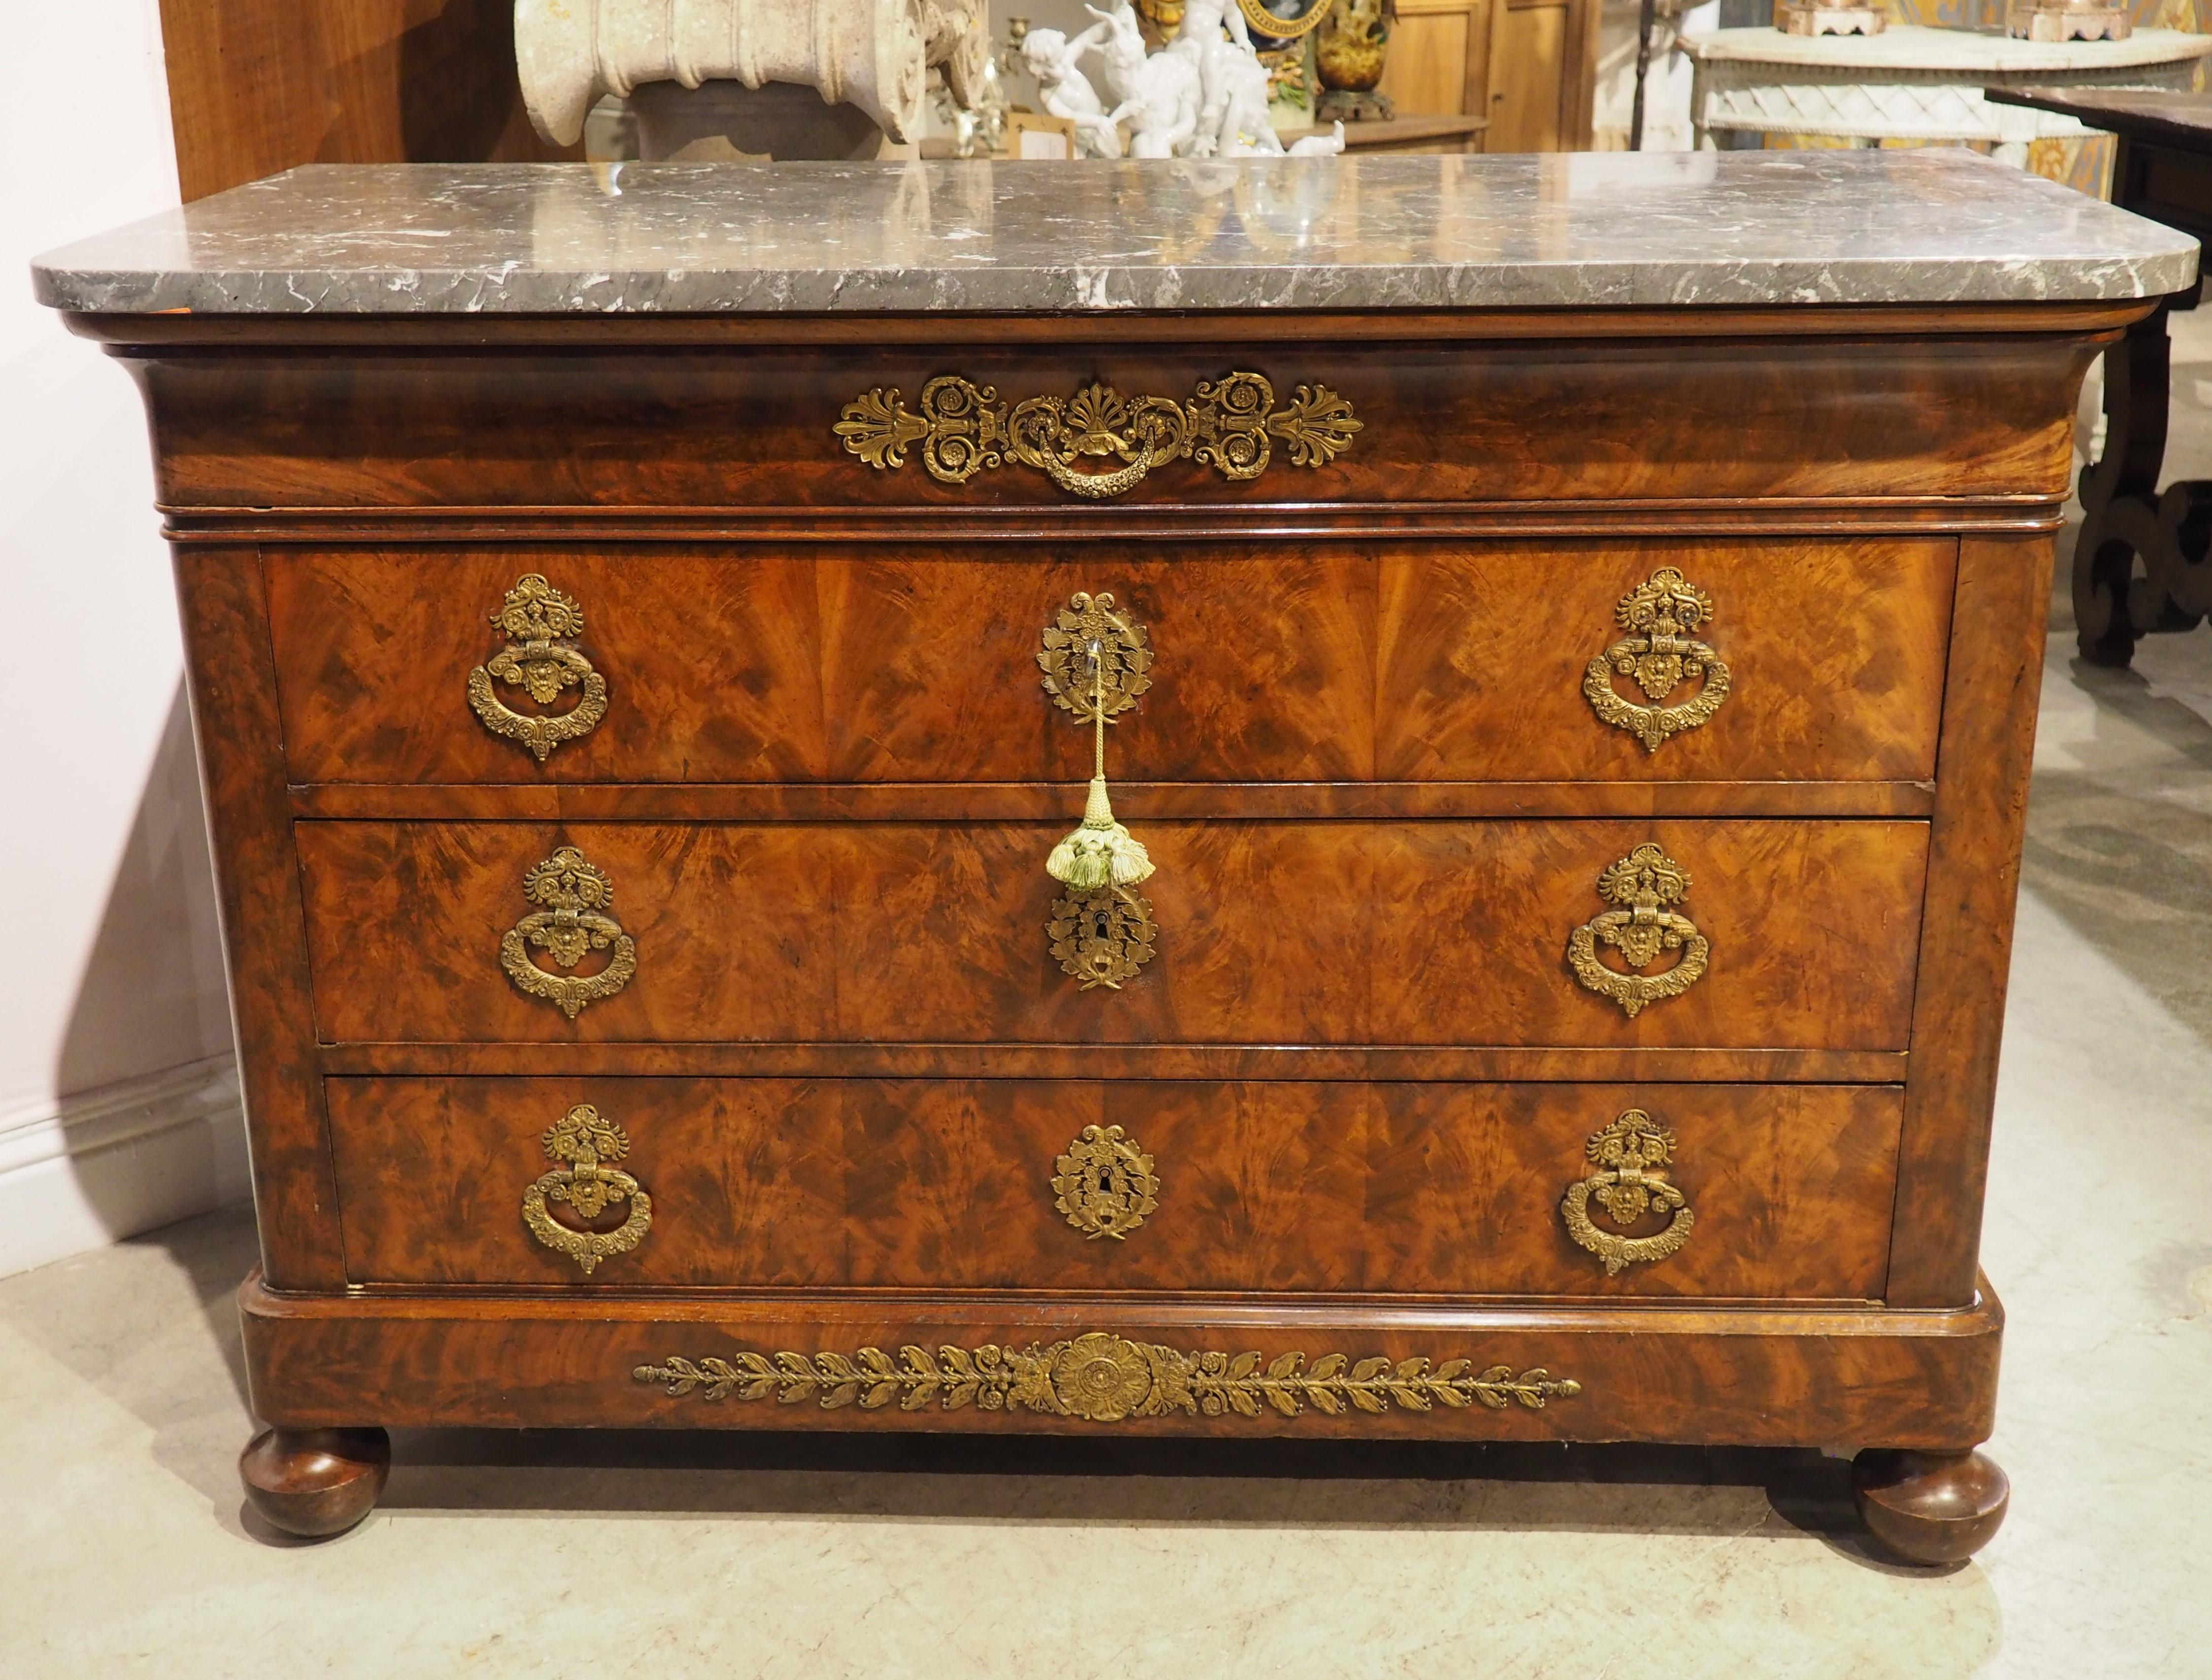 Circa 1820 French Restauration Commode in Flame Mahogany, Gilt Bronze Hardware For Sale 8